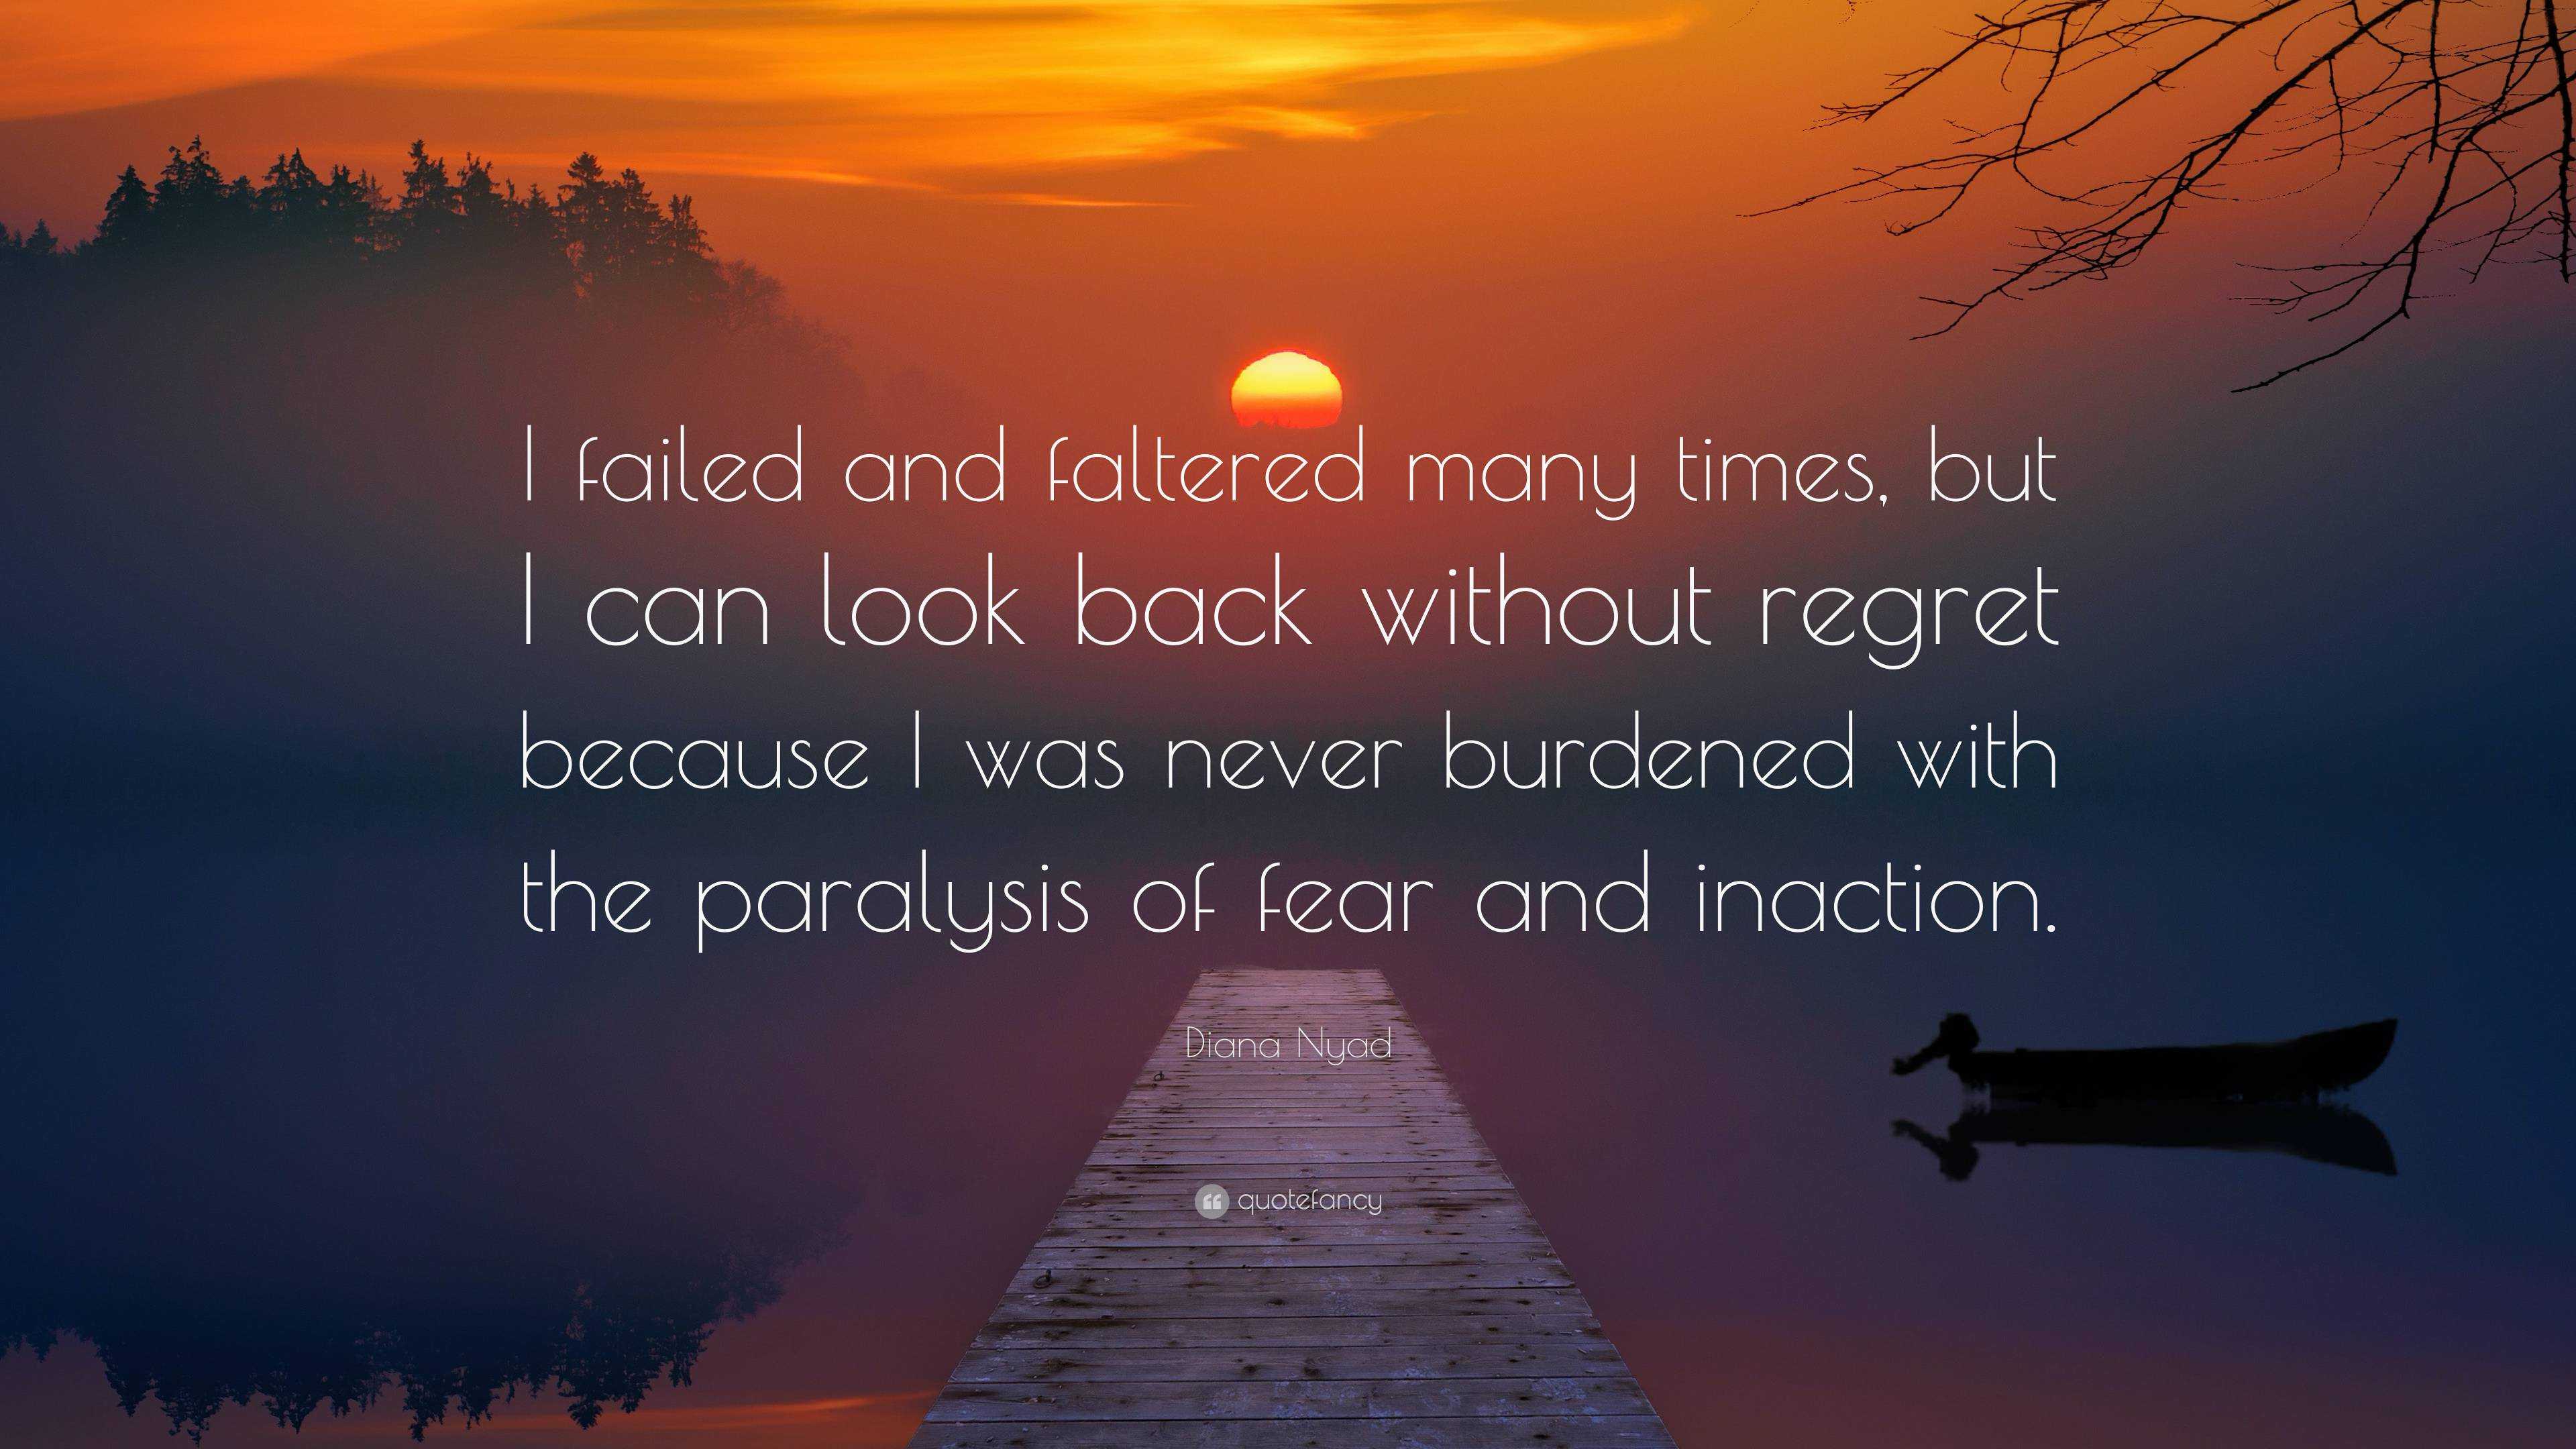 Diana Nyad Quote: “I failed and faltered many times, but I can look ...